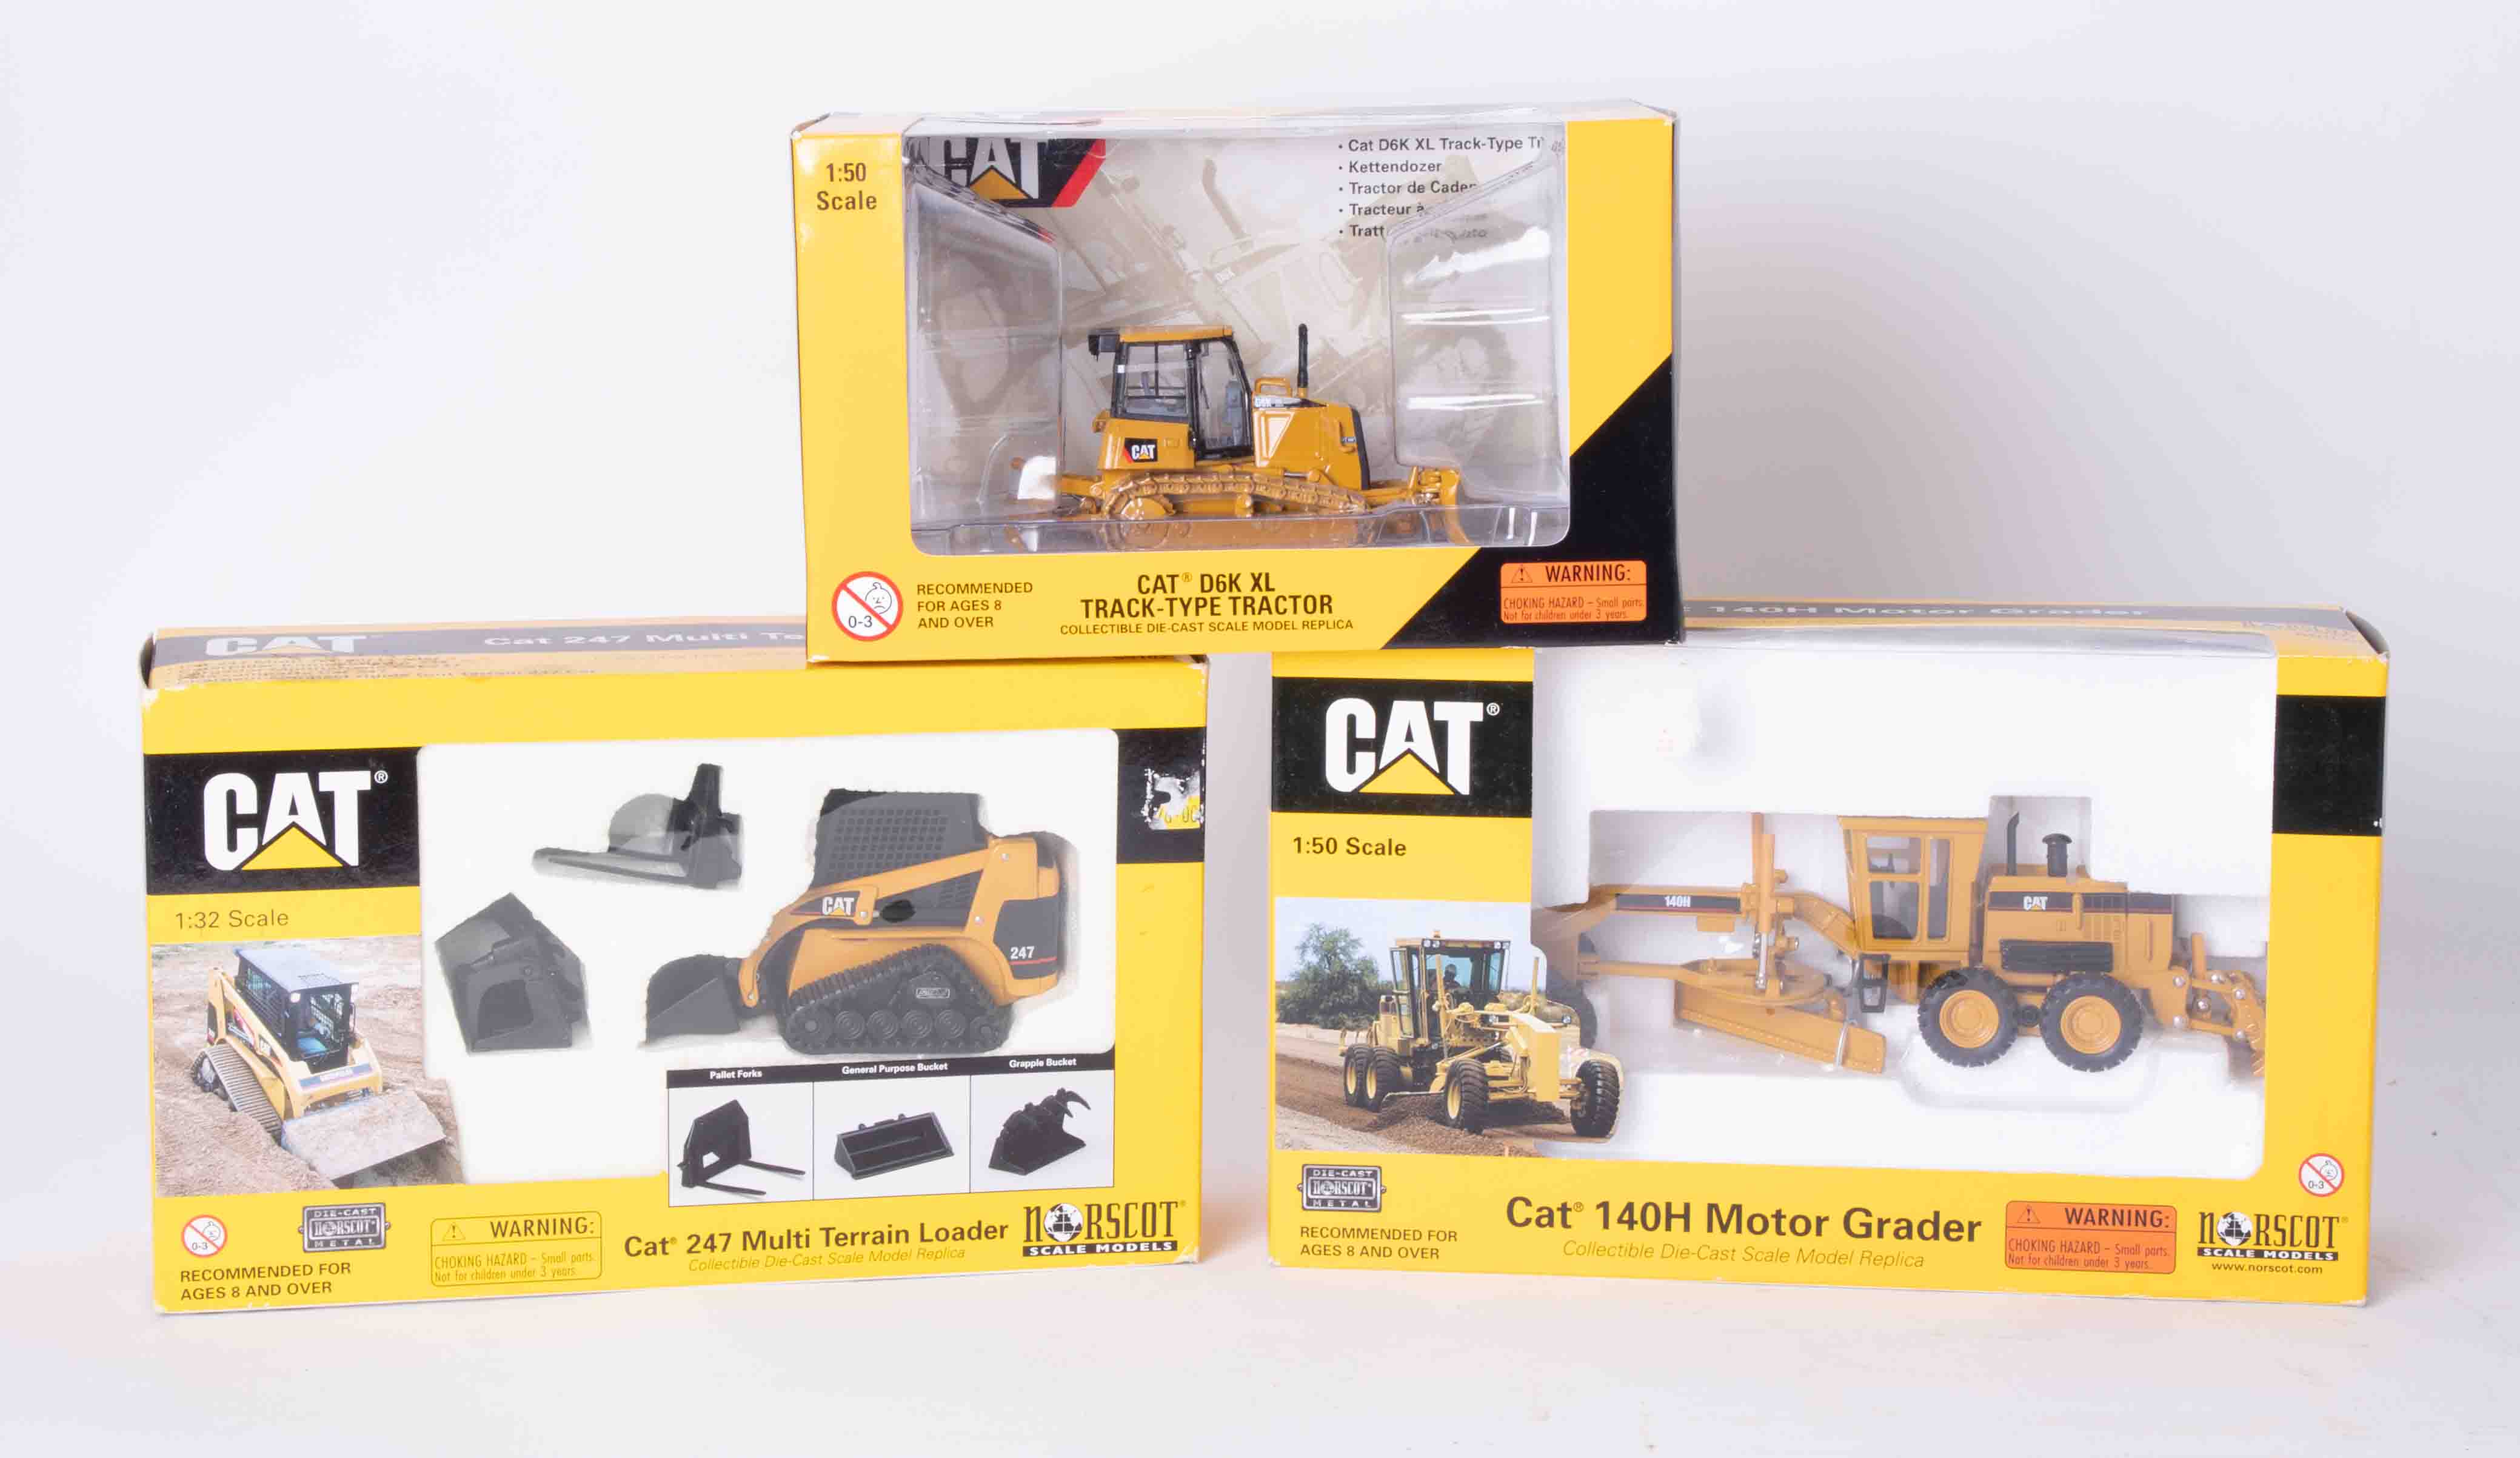 CAT 140H Motor Grader 1:50 scale, CAT D6K XL Track-Type Tractor 1:50 scale and CAT 247 Multi Terrain